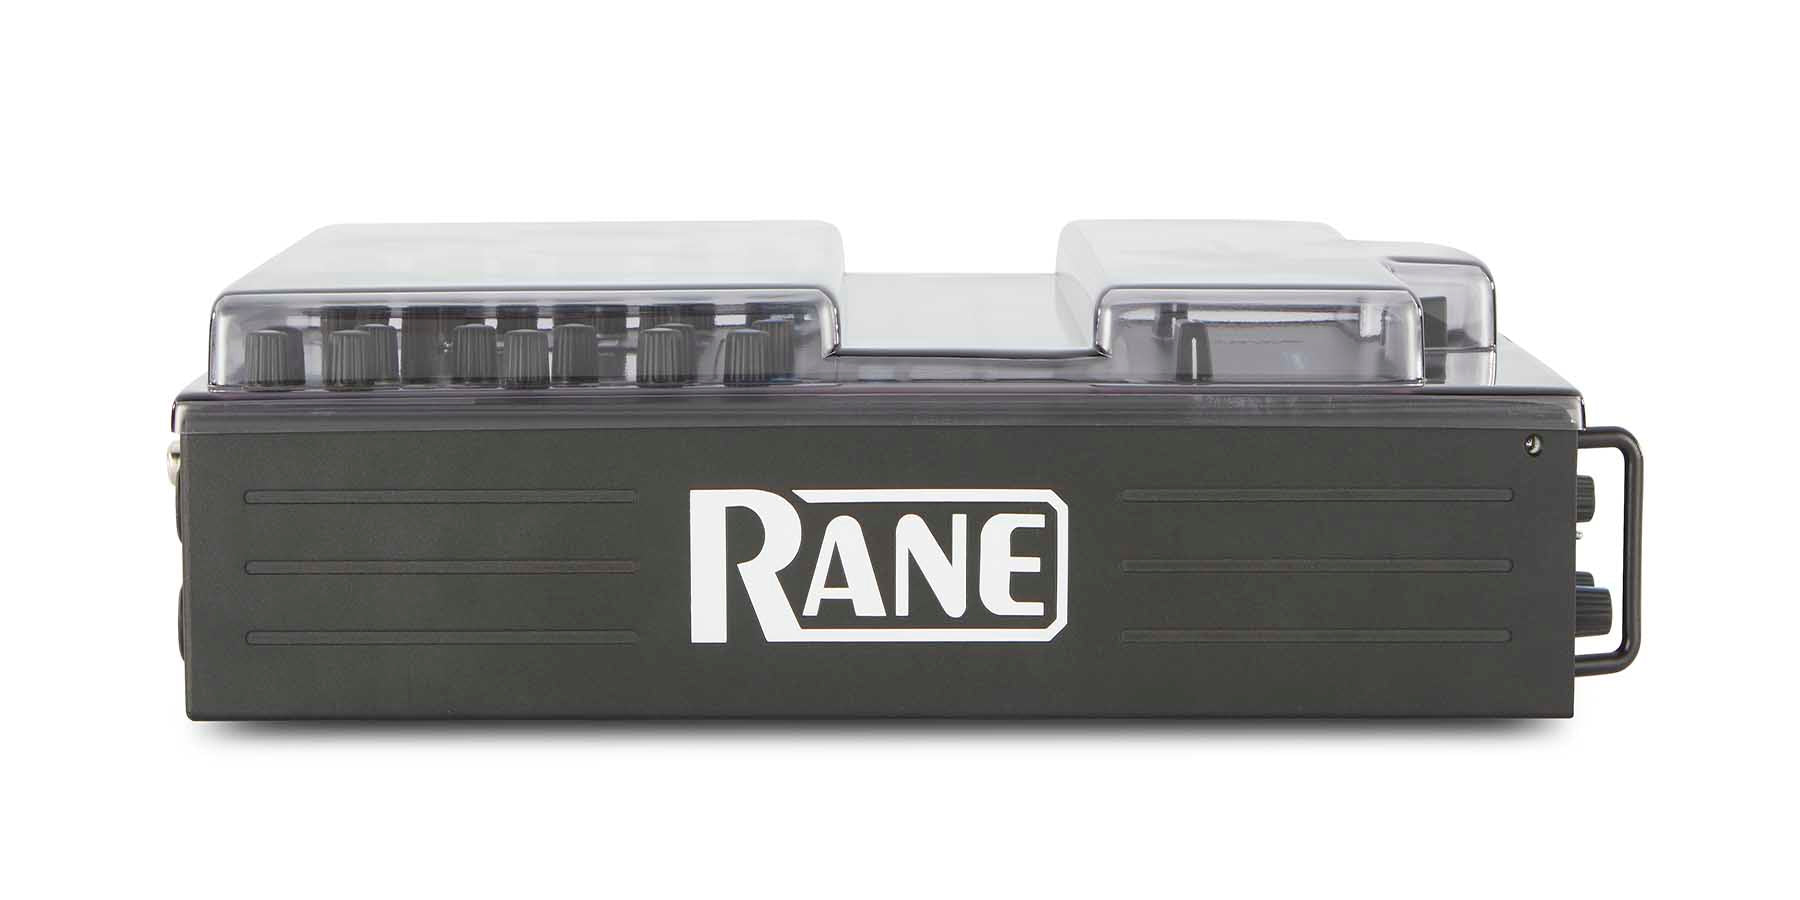 Decksaver DS-PC-RANE72 Protection Cover For Rane Seventy-Two / Seventy-Two MK2 Mixer - Hollywood DJ